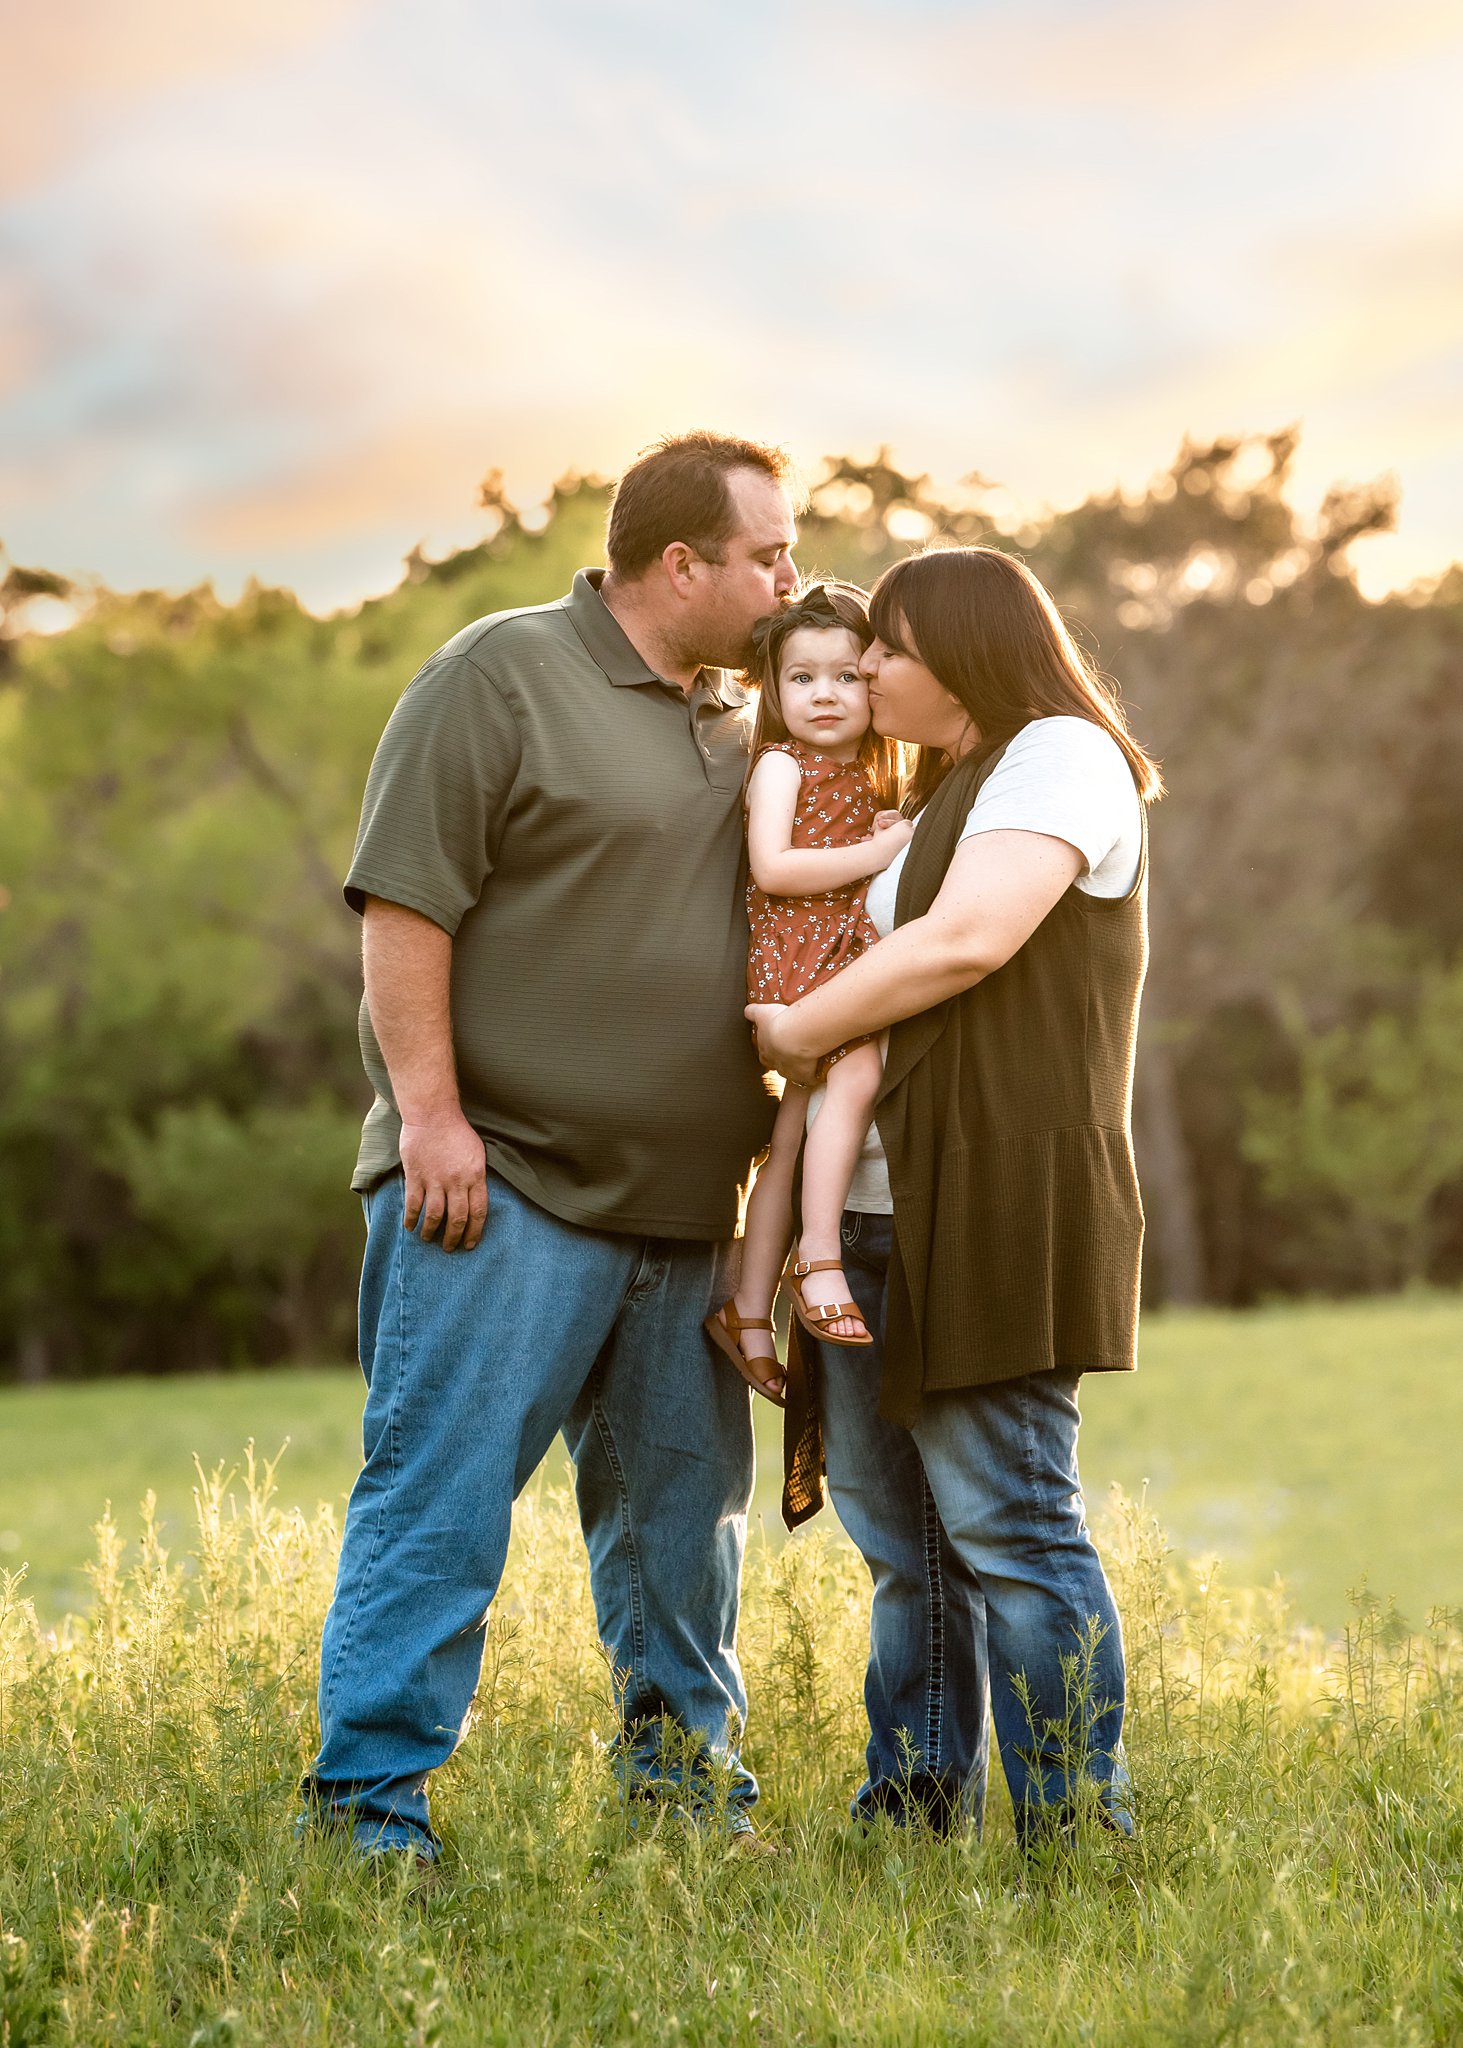 A mother and father stand in a grassy field kissing their young daughter